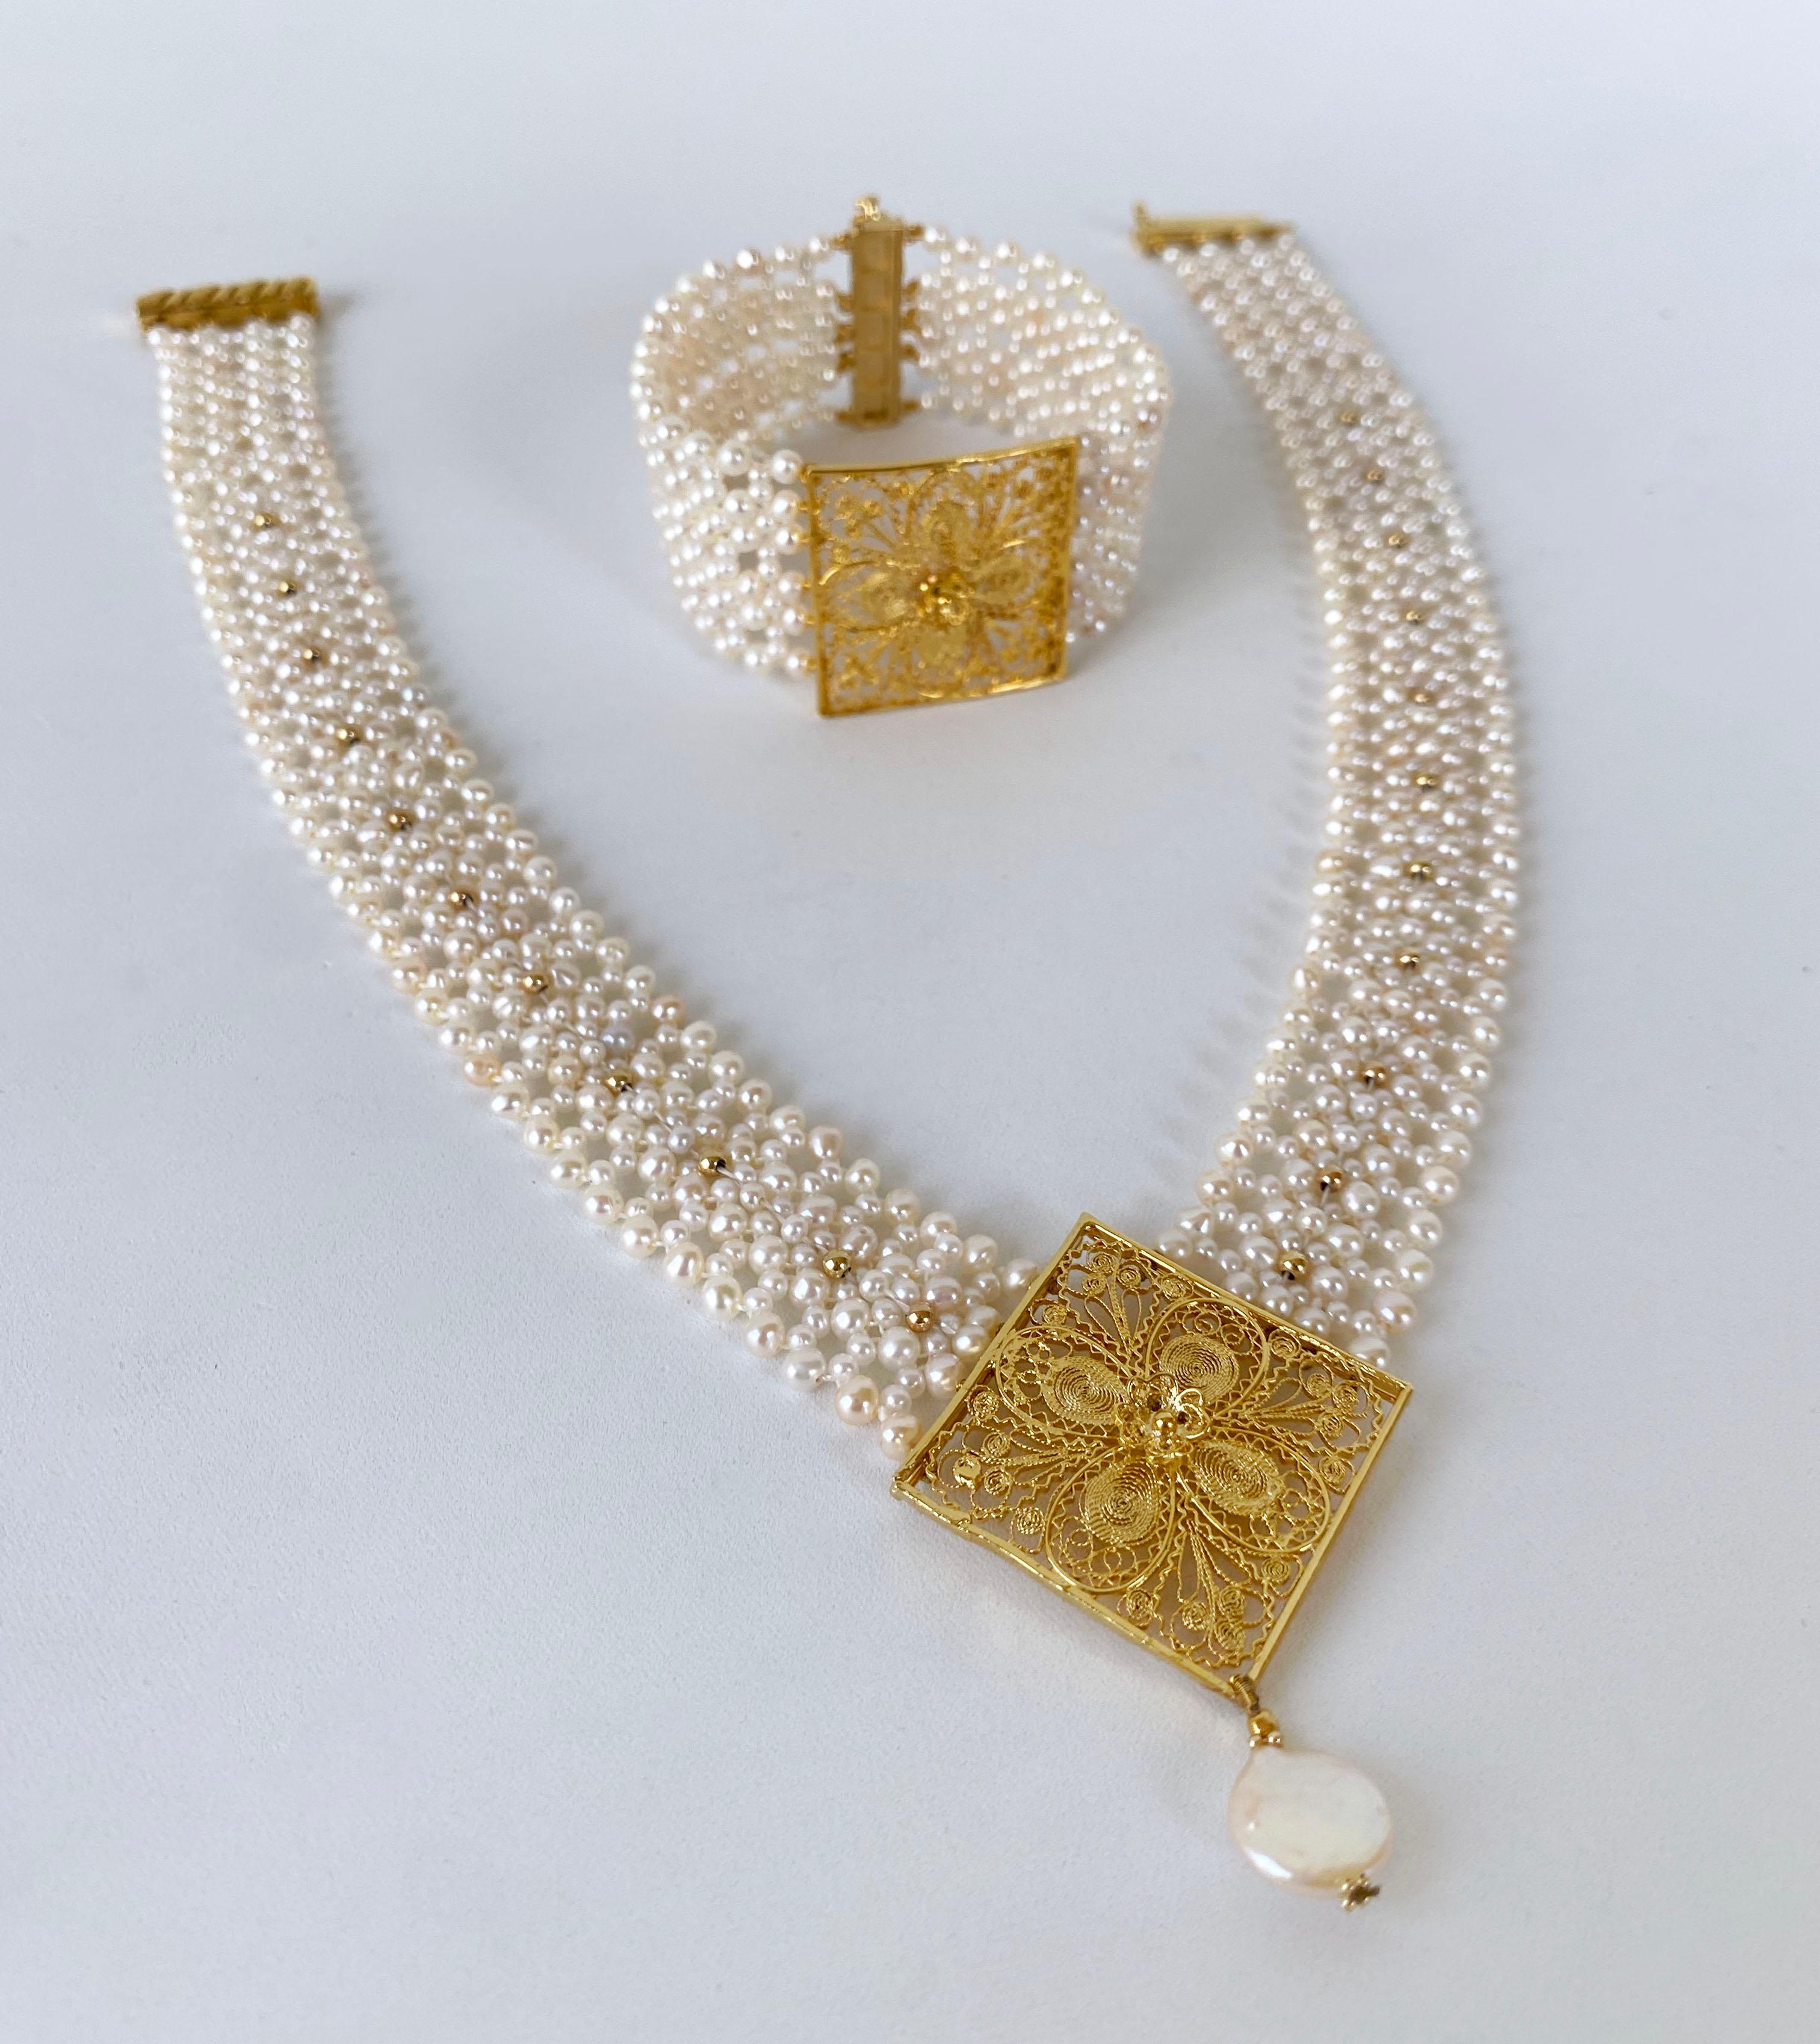 Elegant and beautiful Bracelet by Marina J. This piece features a Vintage Brooch that has been reworked into striking Centerpiece. The Centerpiece is a silver, 18k Yellow Gold Plated Floral square displaying a magnificent design. A stunning Pearl